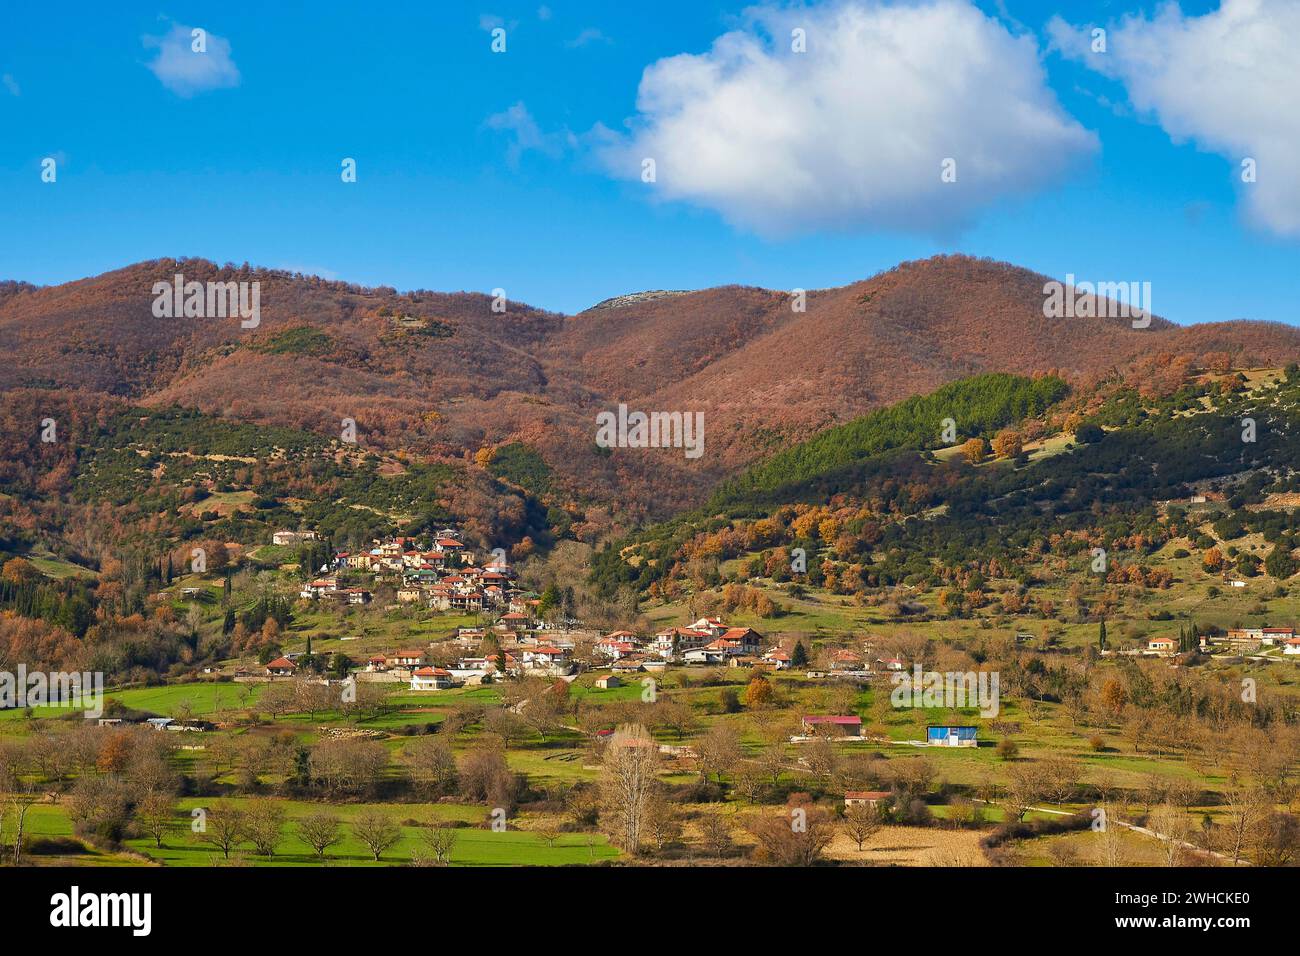 View of a village surrounded by autumnal hills and meadows, Erymanthos Mountains, northwest of the Peloponnese peninsula, Peloponnese, Greece Stock Photo